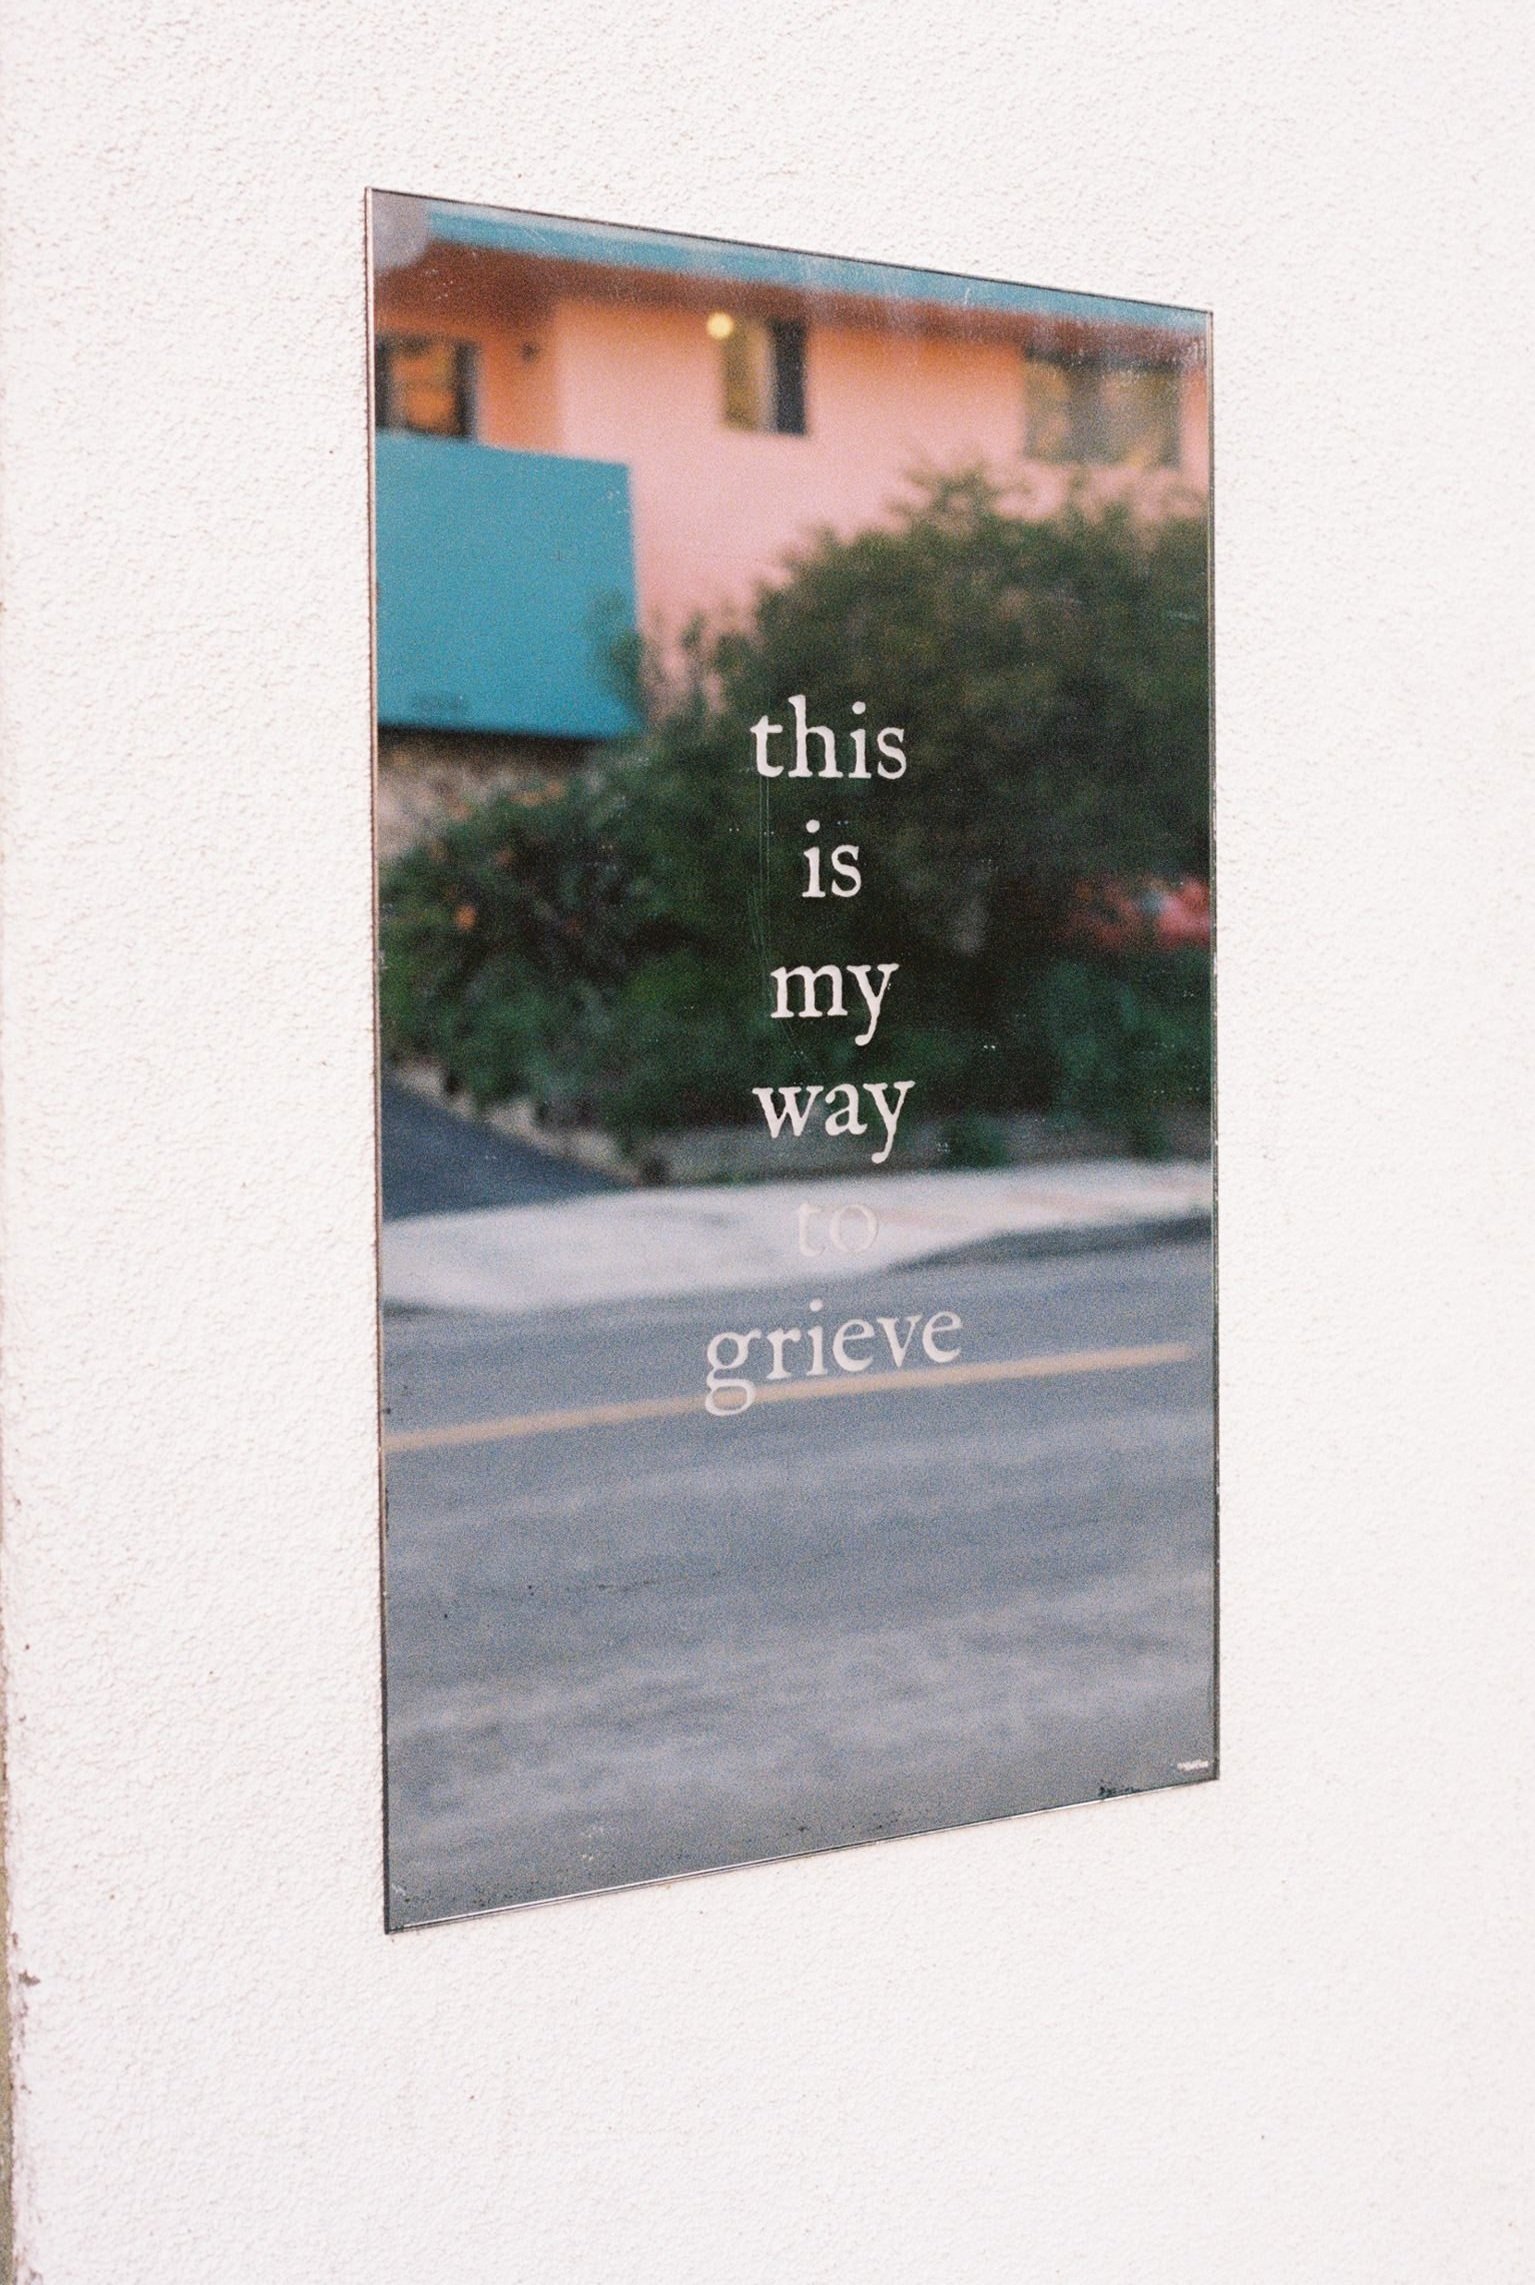 "this is my way to grieve", (Tracy St, Los Feliz)